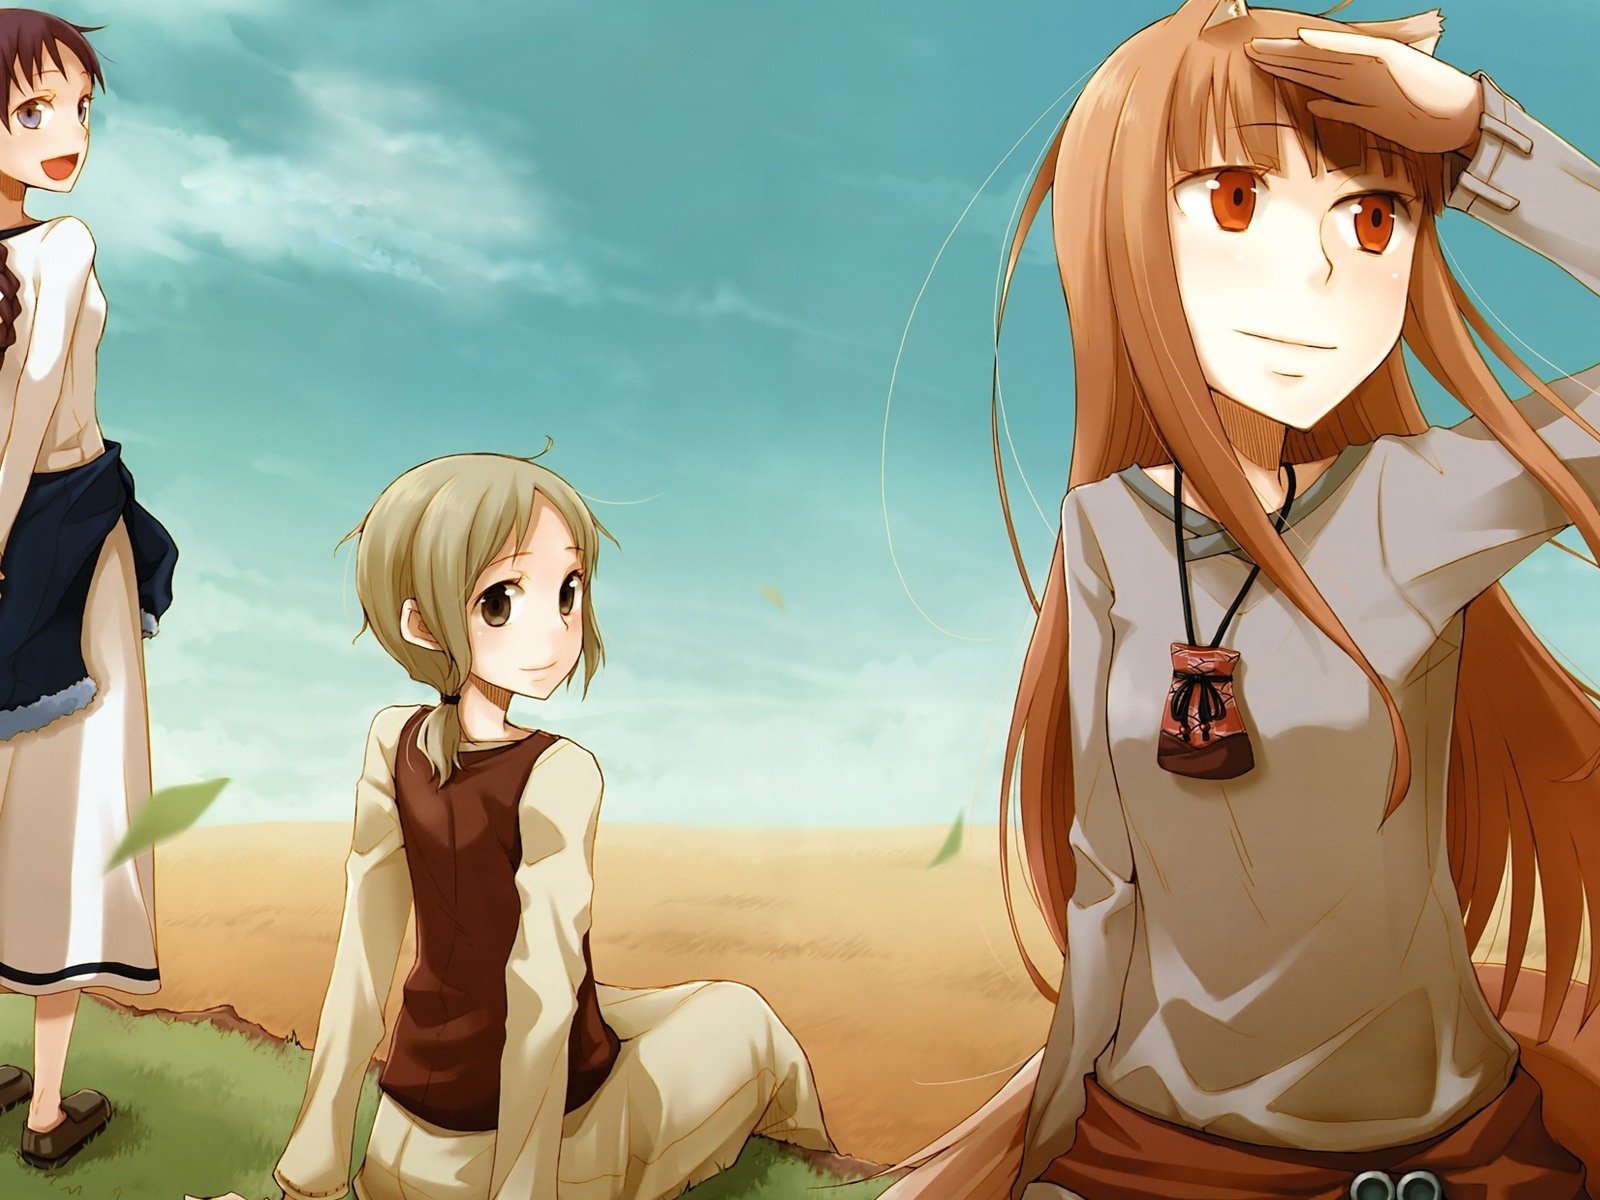 Spice and Wolf HD wallpapers #5 - 1600x1200